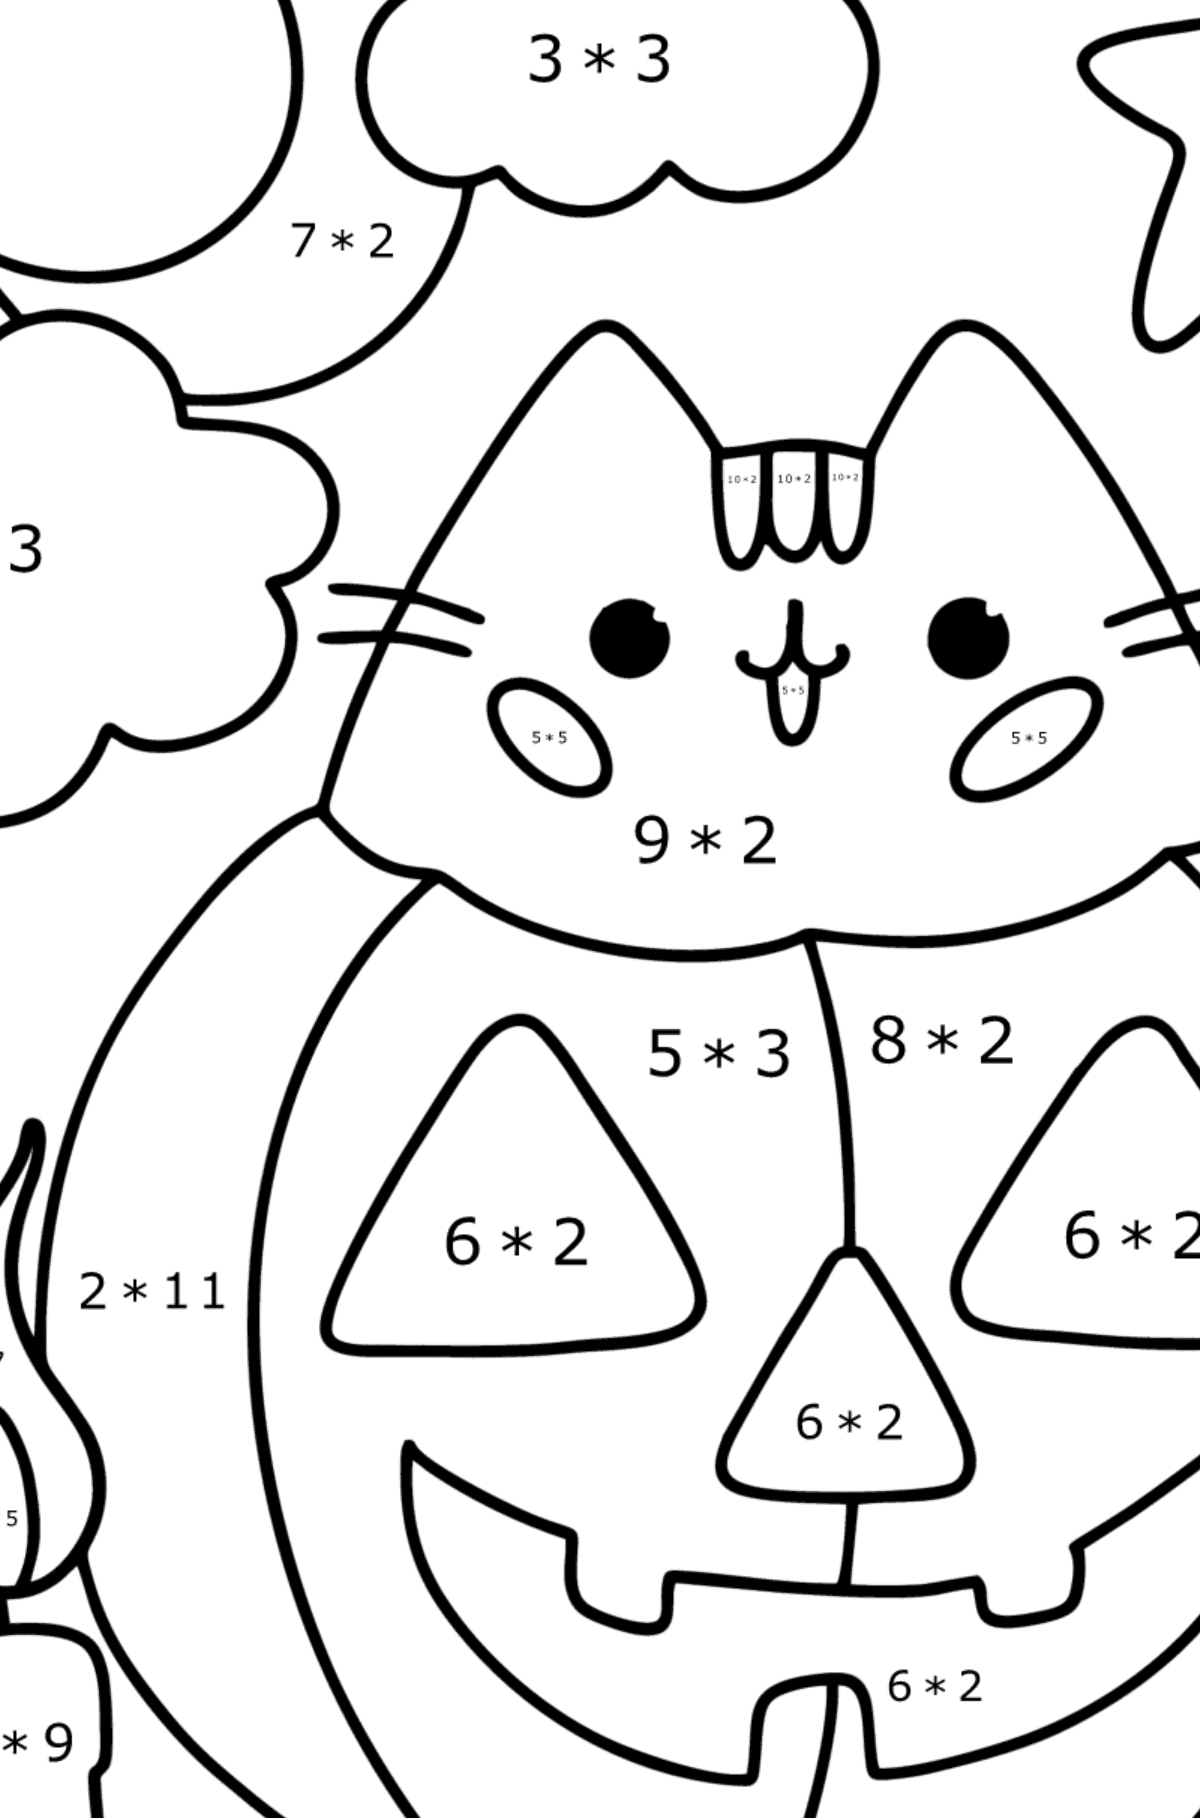 Pusheen and halloween сoloring page - Math Coloring - Multiplication for Kids